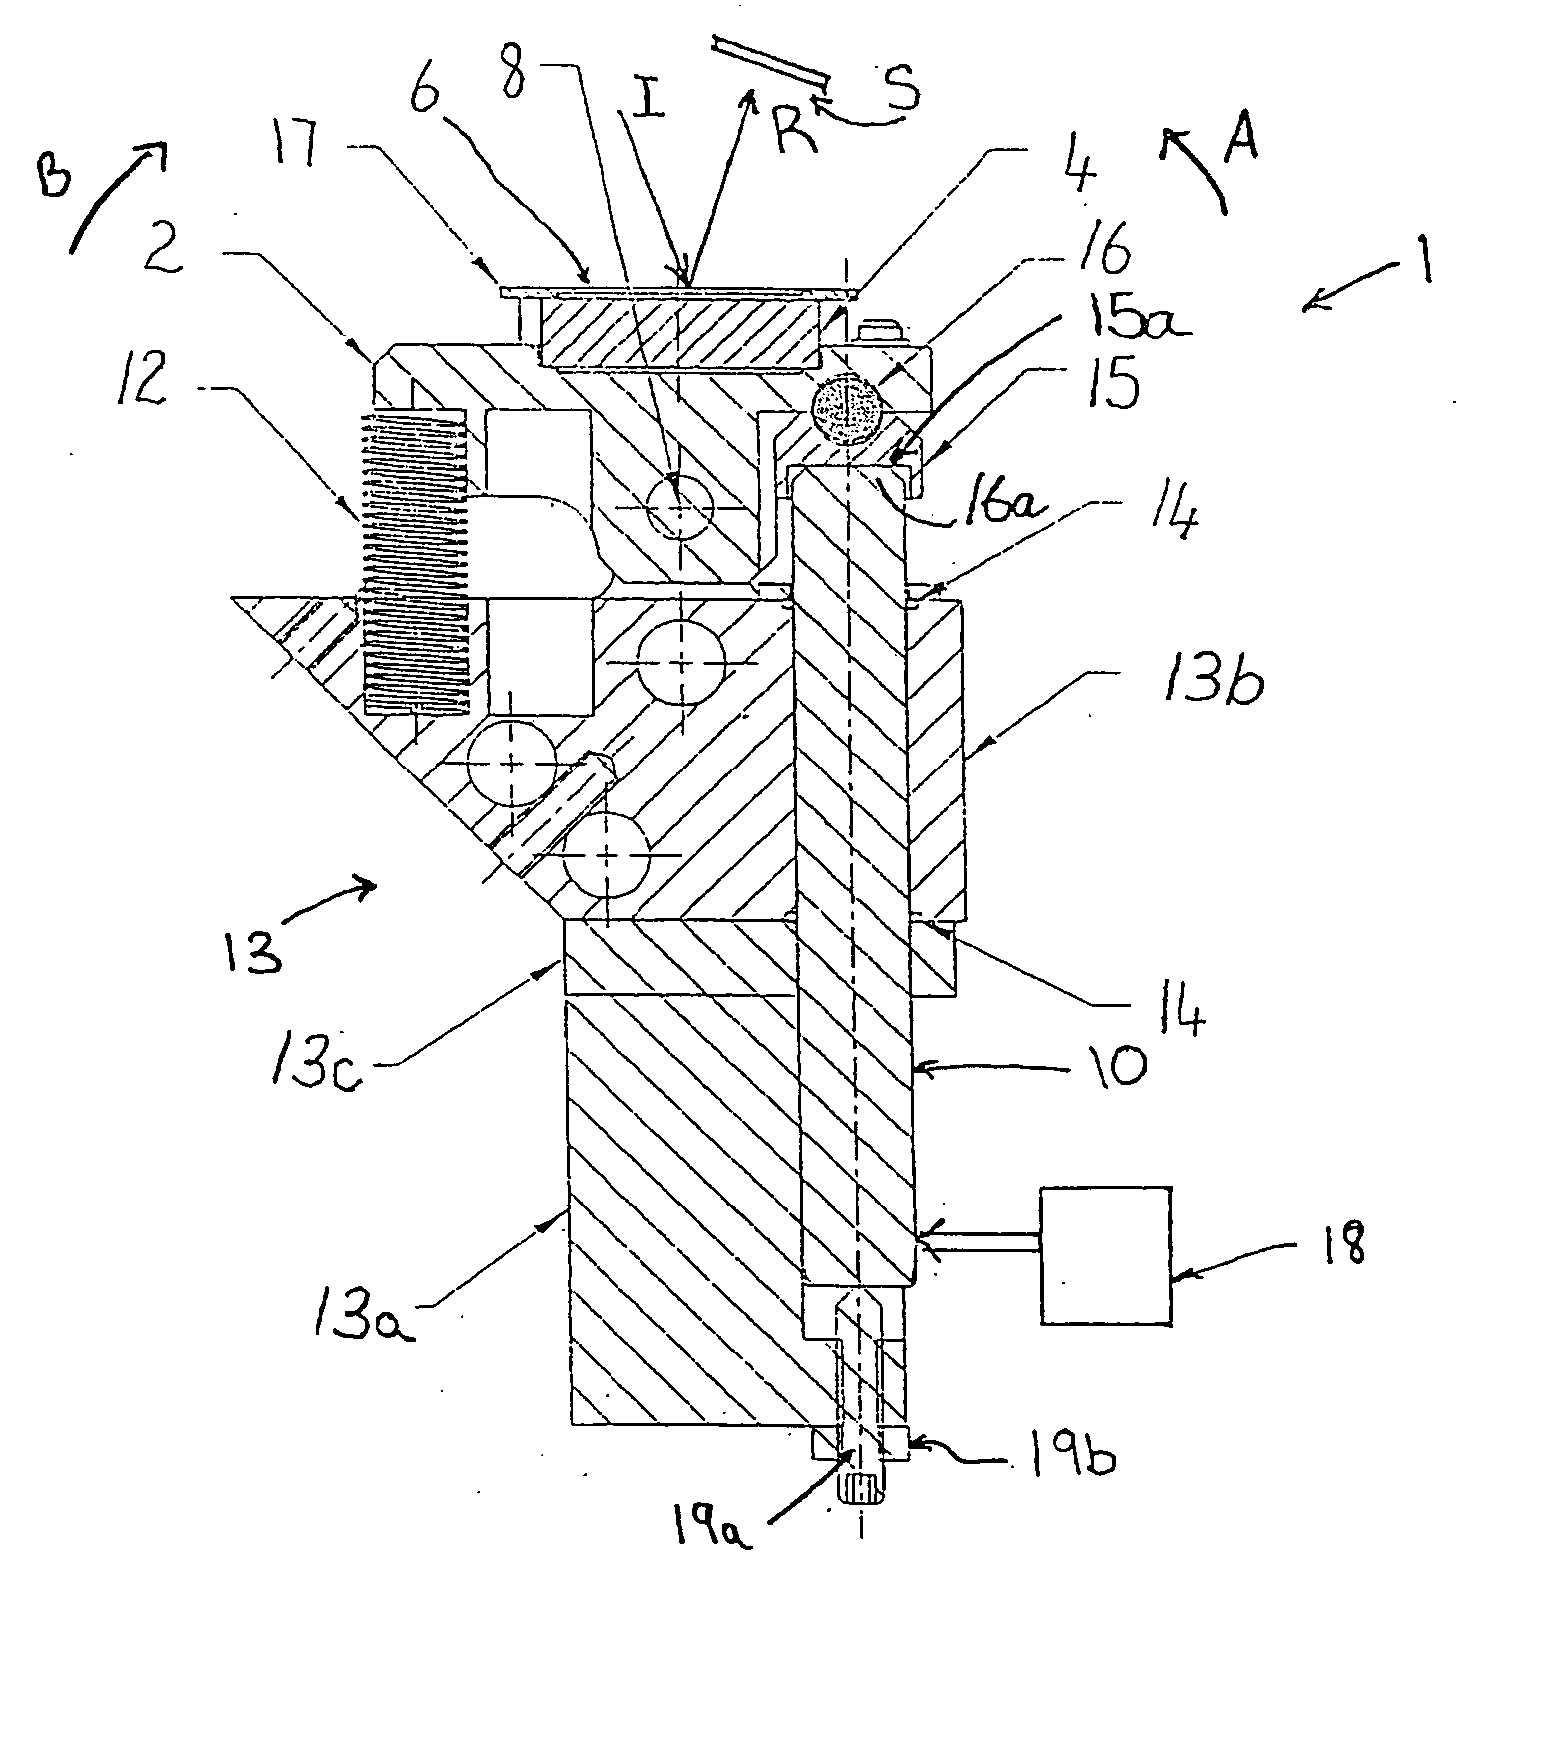 Scanning device and method of scanning an optical beam over a surface